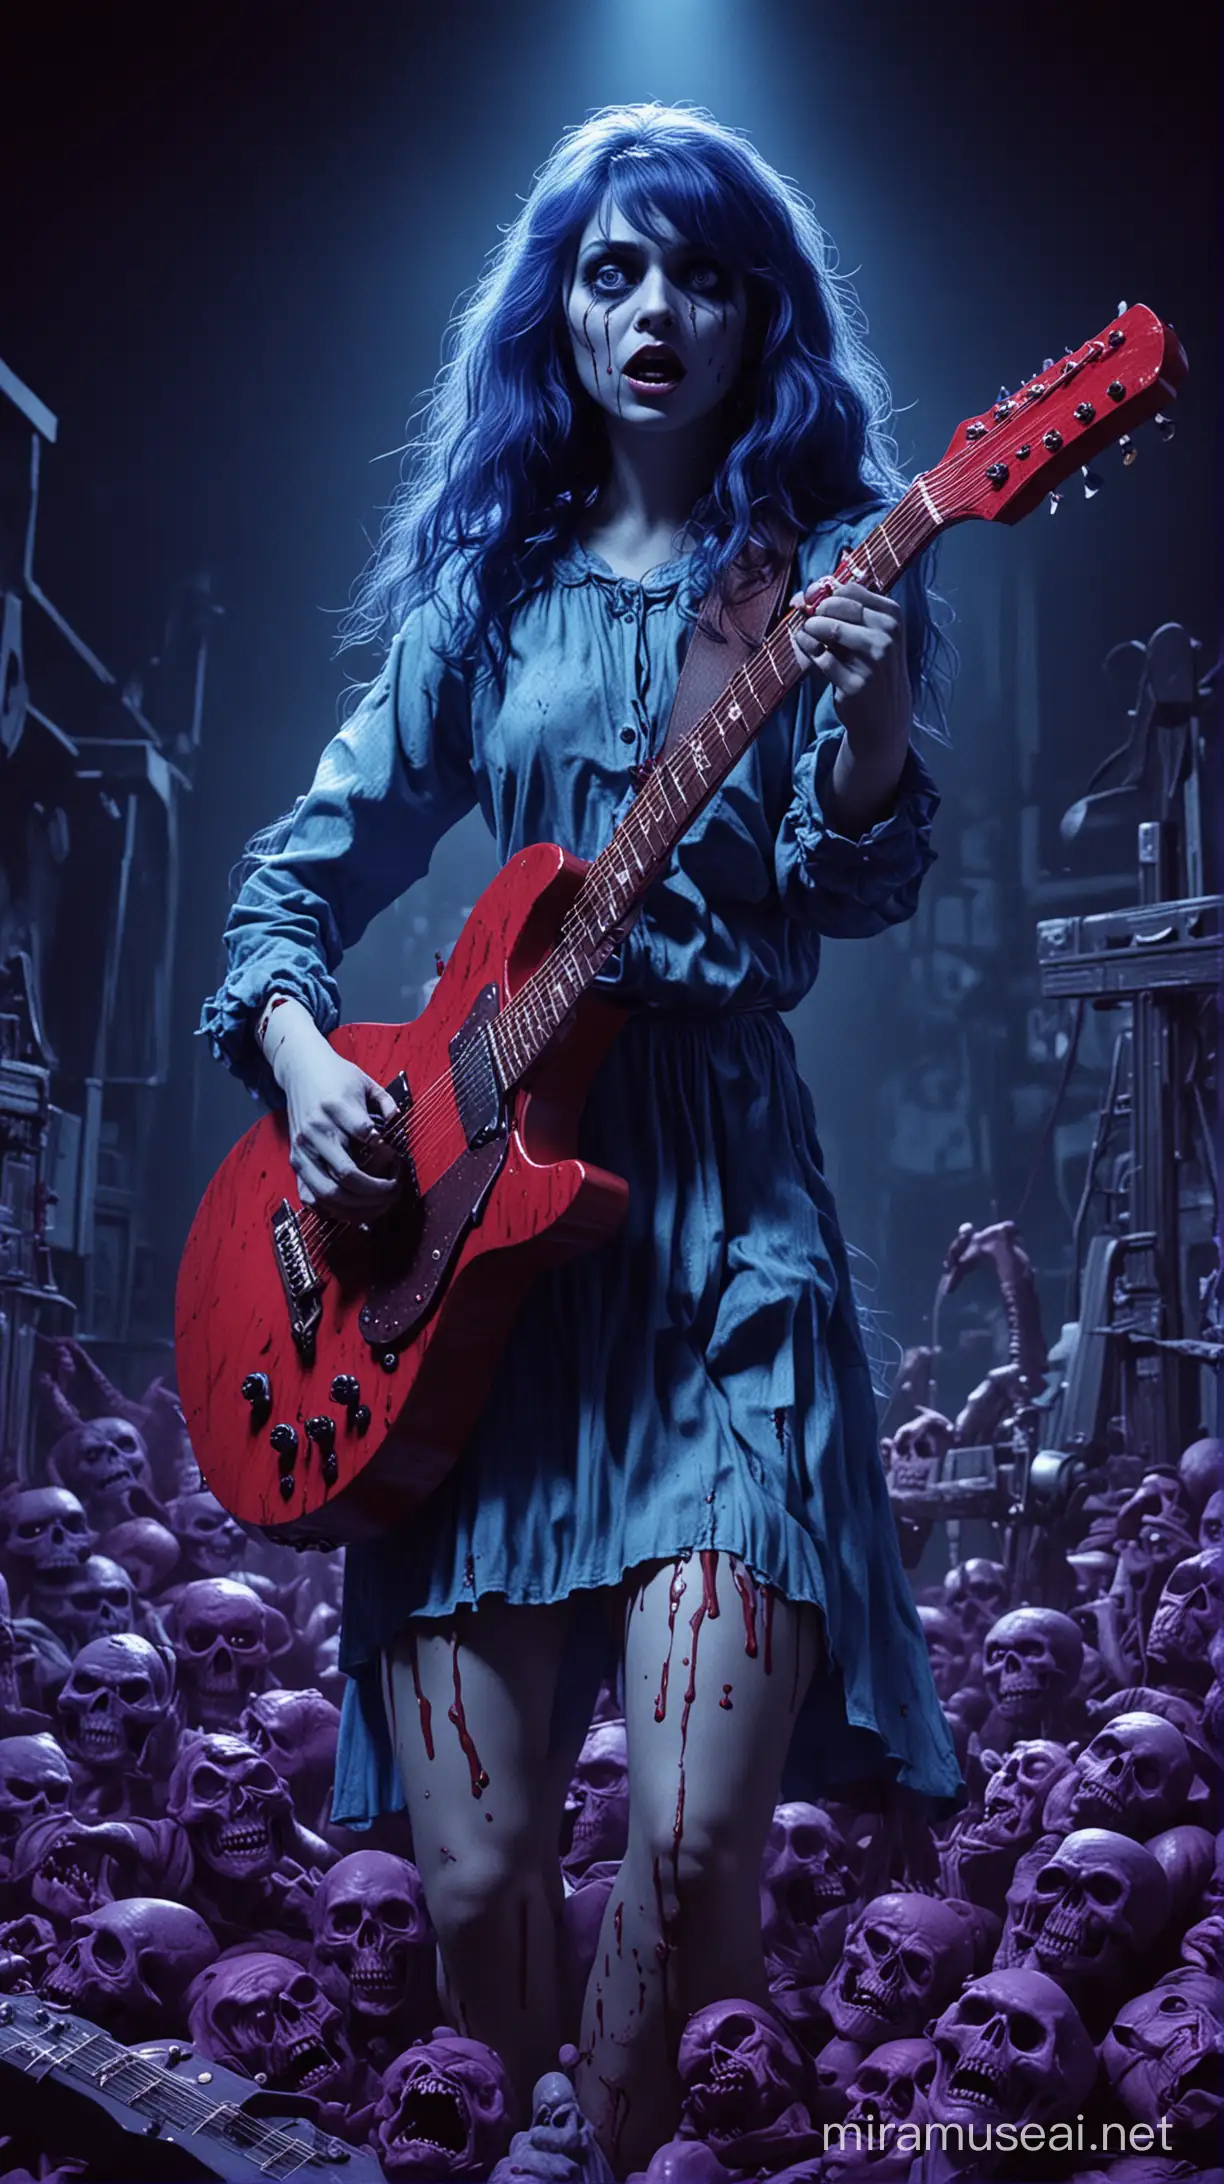 Generate a poster in a horror movie style of the 80s with blue hues, reds, and purple. Use this film synopsis for the cover, A talented stop-motion animator holding guitar becomes consumed by the grotesque world of her horrifying creations -- with deadly results. NO TEXT